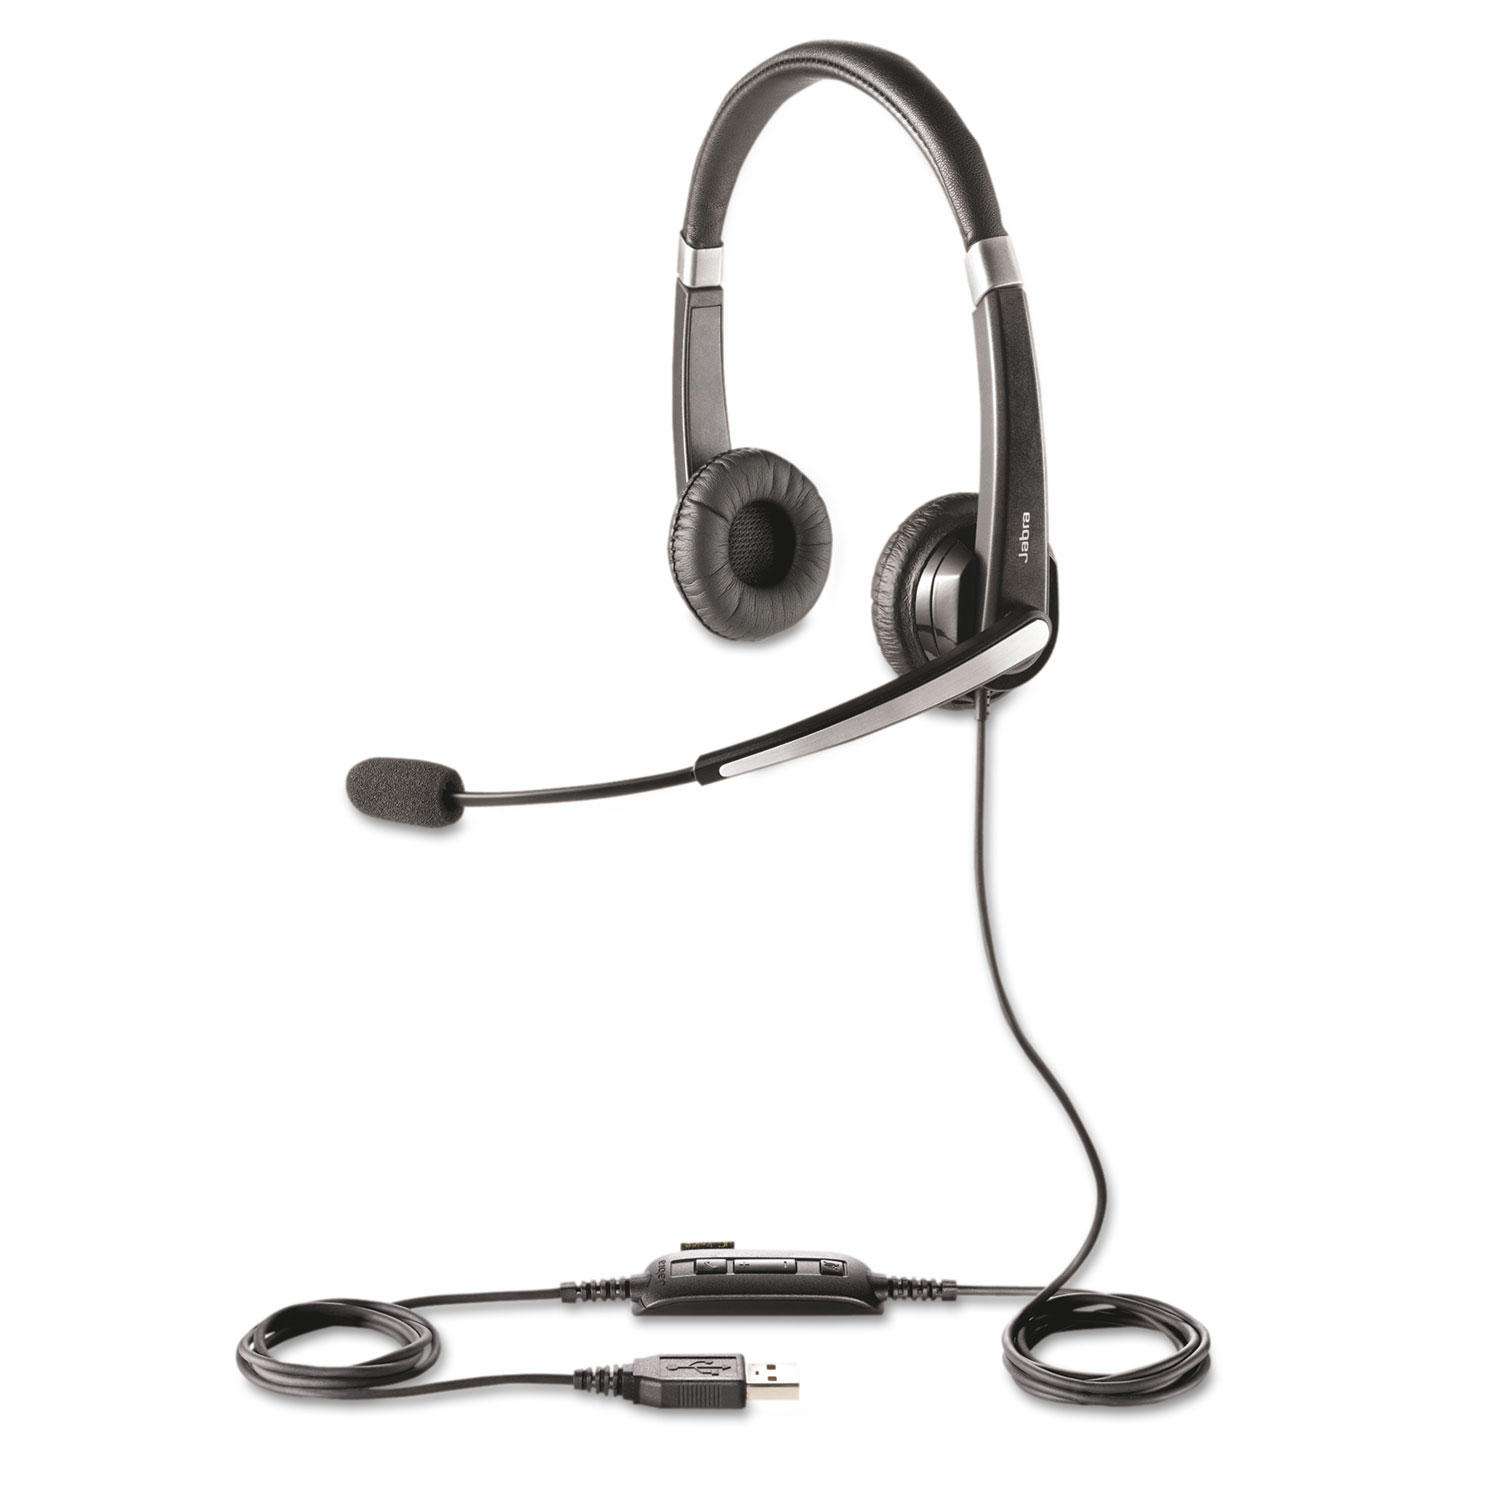 UC Voice 550 Binaural Over-the-Head Corded Headset, Microsoft Certified